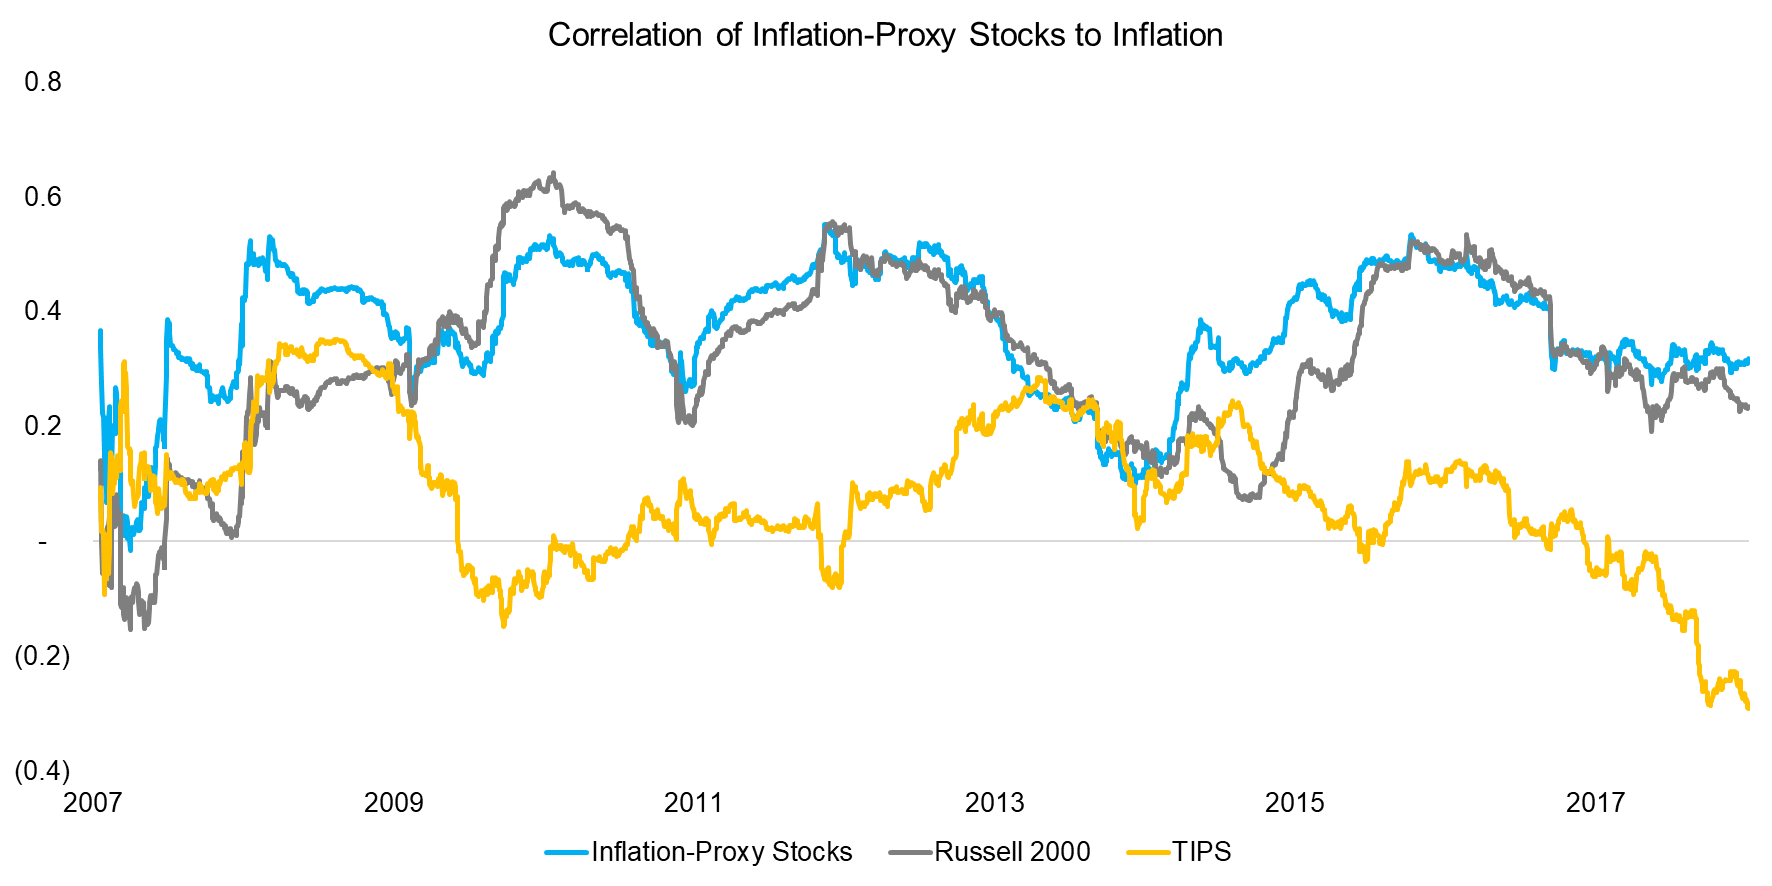 Correlation of Inflation-Proxy Stocks to Inflation